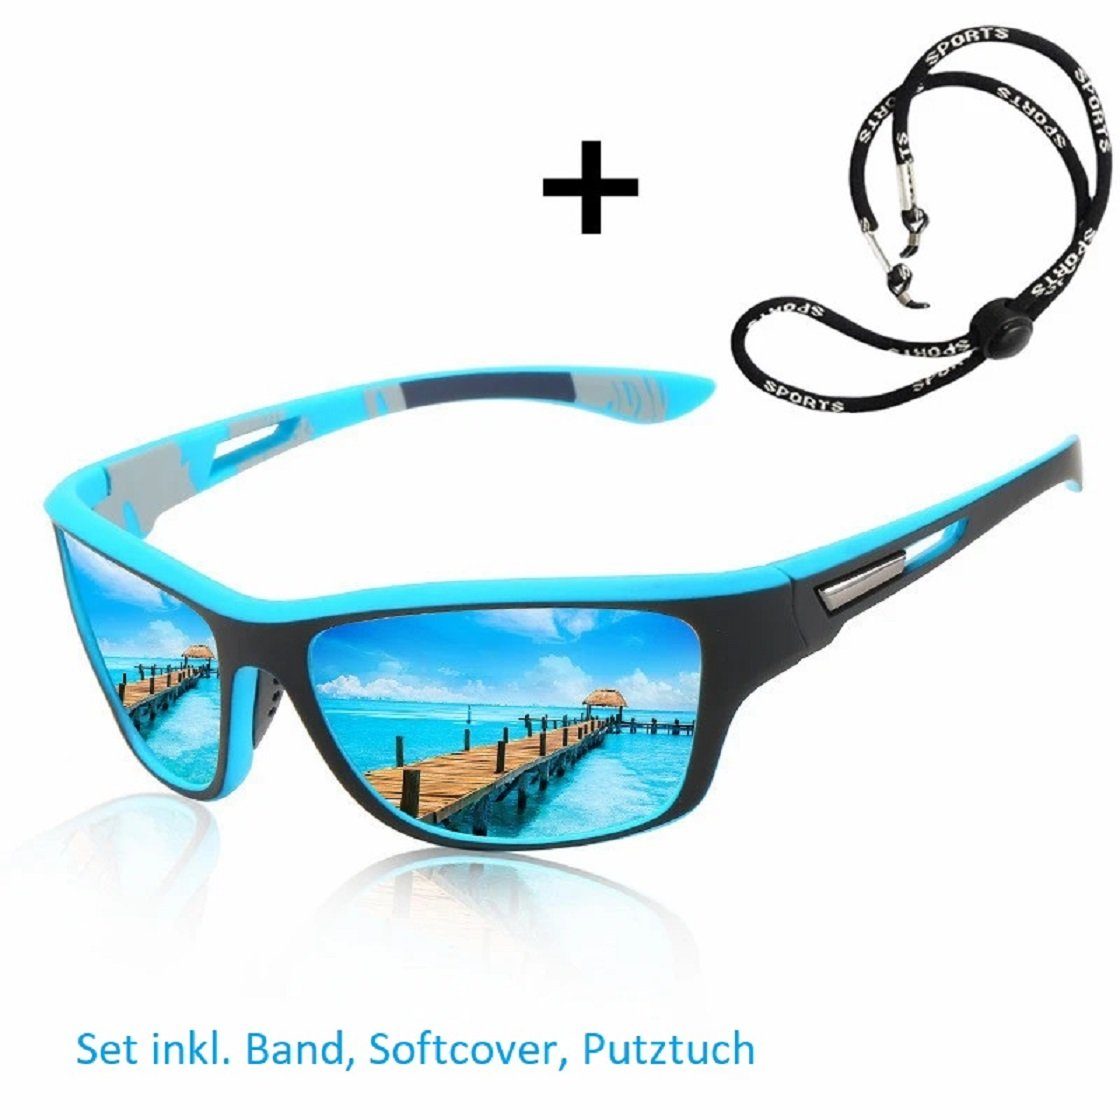 Putztuch Band, too Softcover, Sportbrille Brille, Tornado, Amy